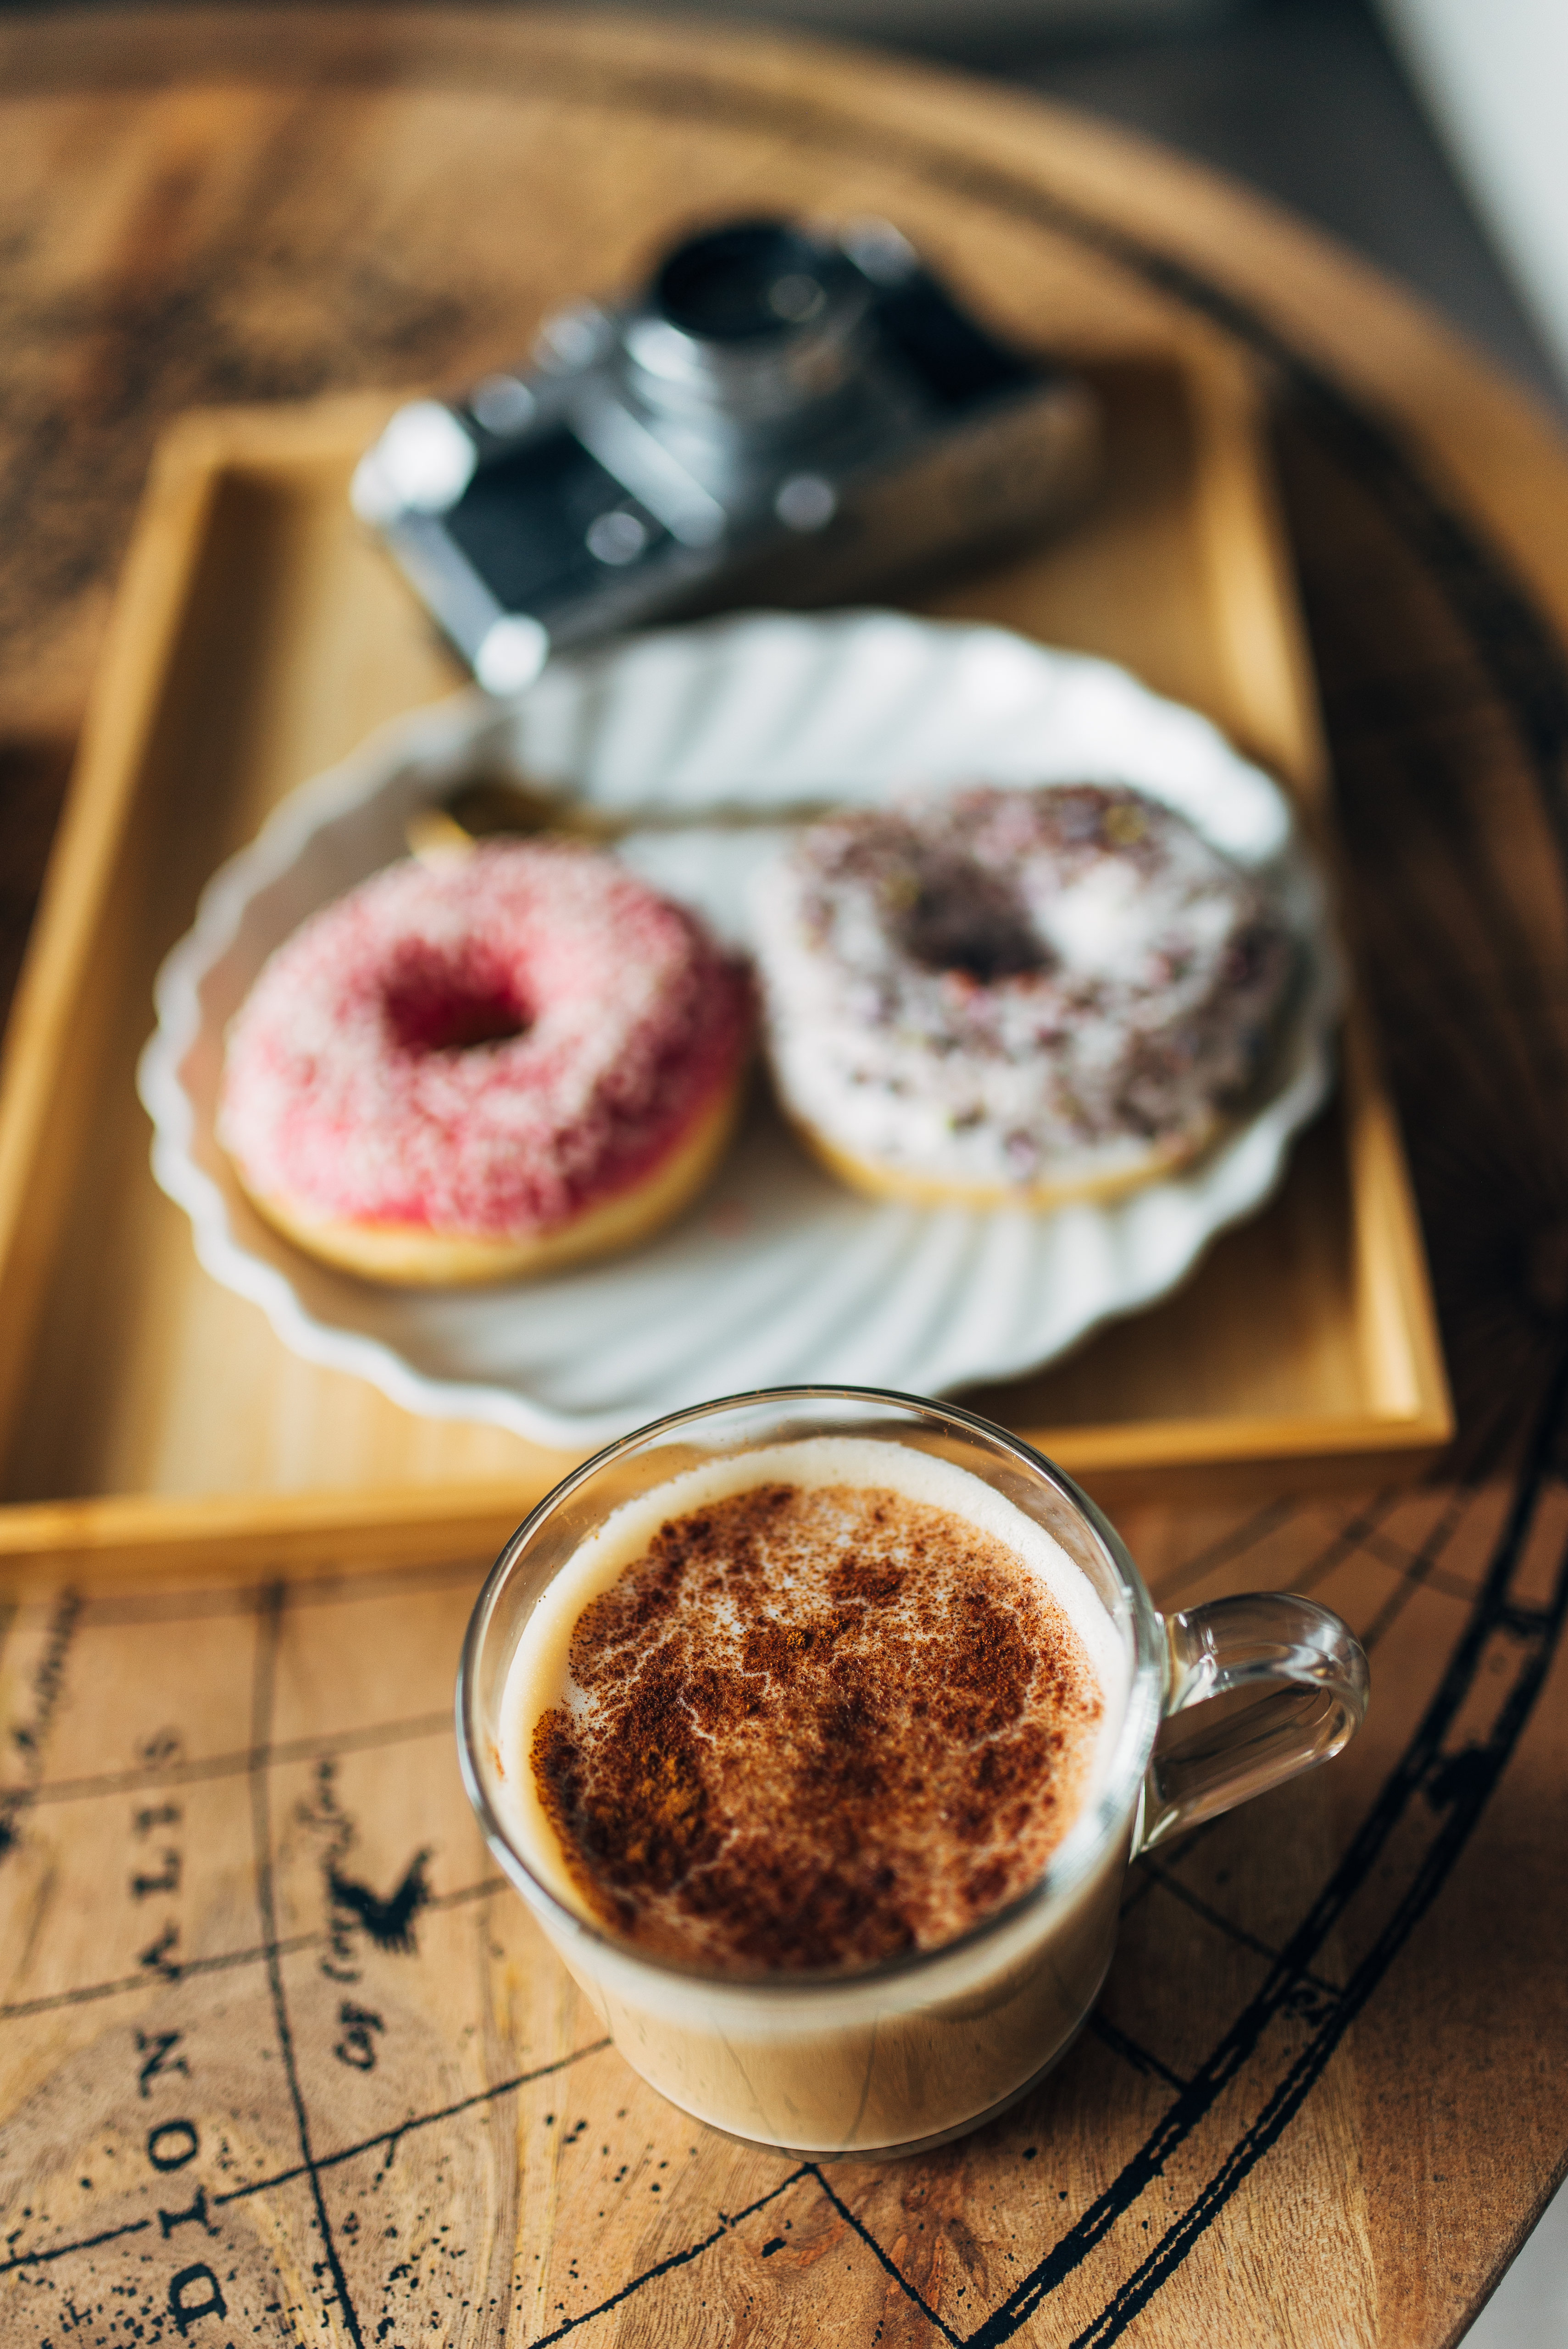 92171 Screensavers and Wallpapers Donuts for phone. Download food, coffee, cup, table, camera, donuts pictures for free